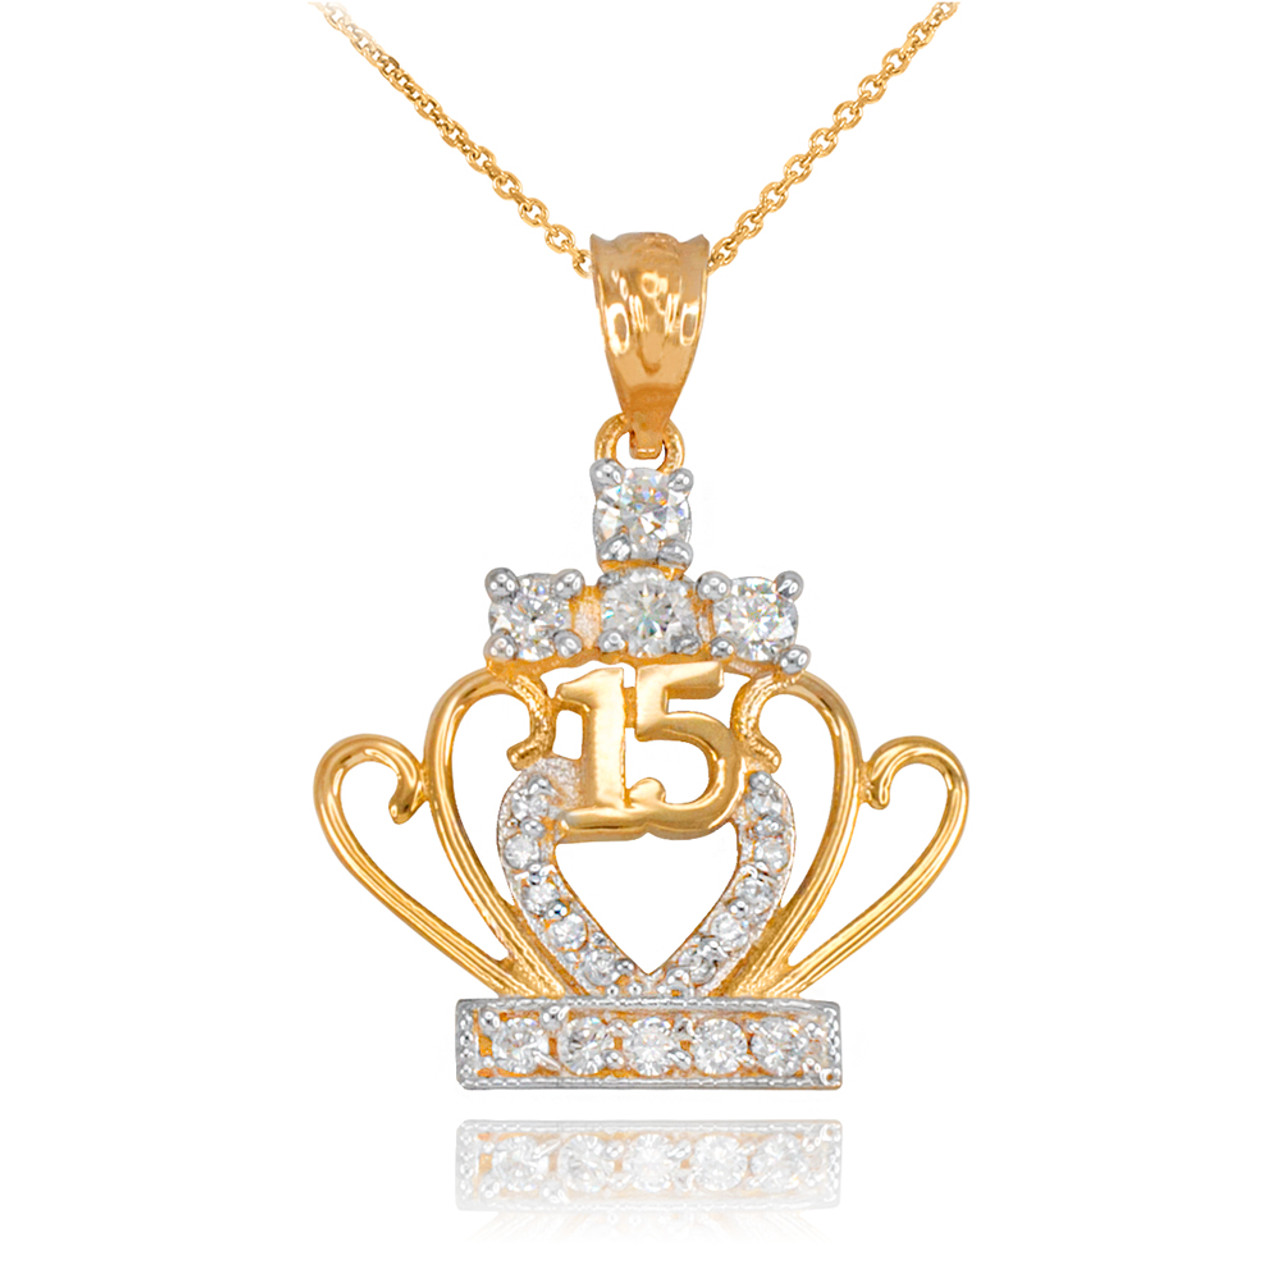 Gold Quinceanera 15 Años CZ Pendant Necklace | Factory Direct Jewelry